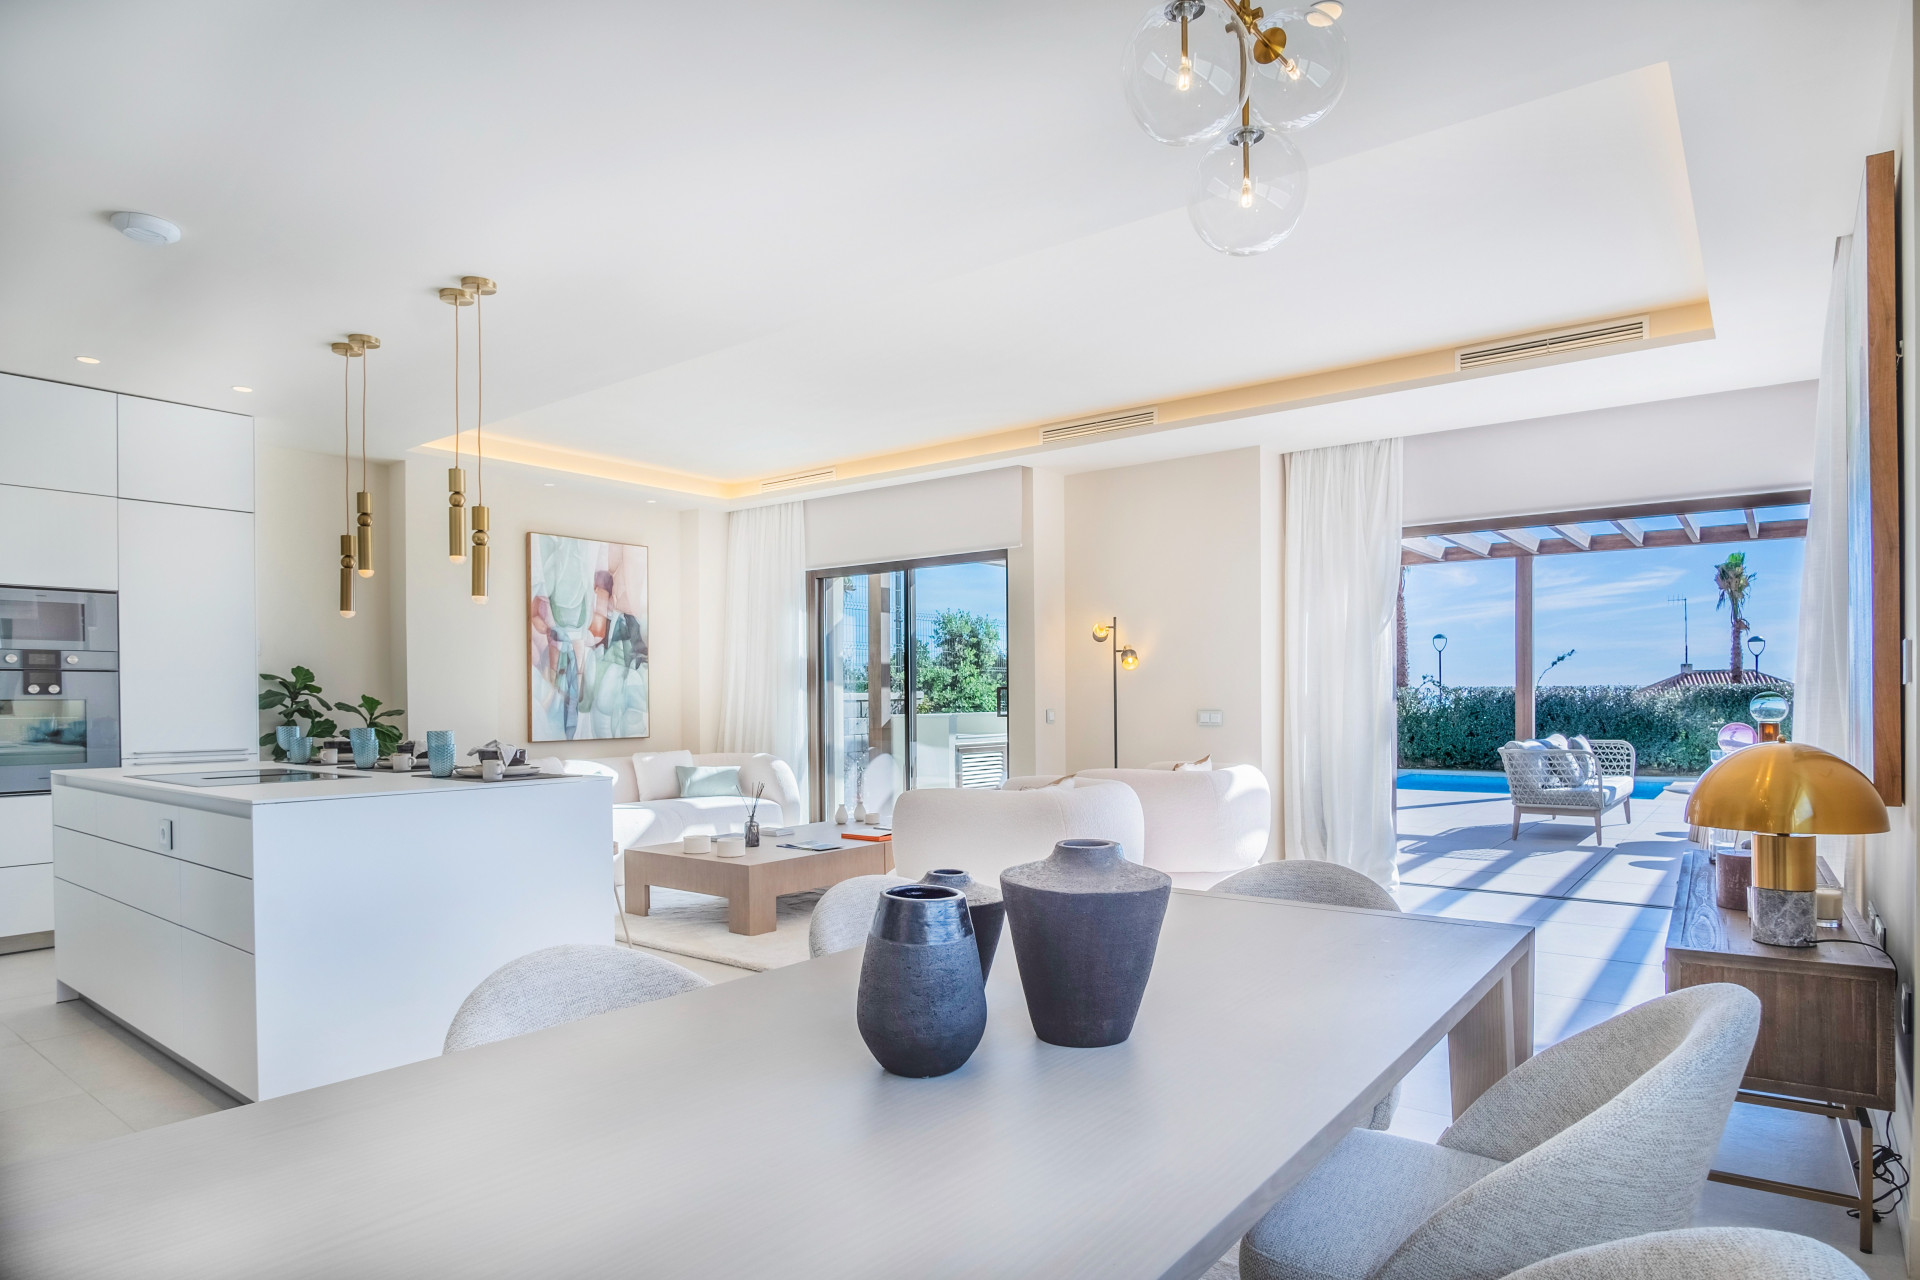 Brand new beachfront villa located in prestigious gated community with 24-hour security